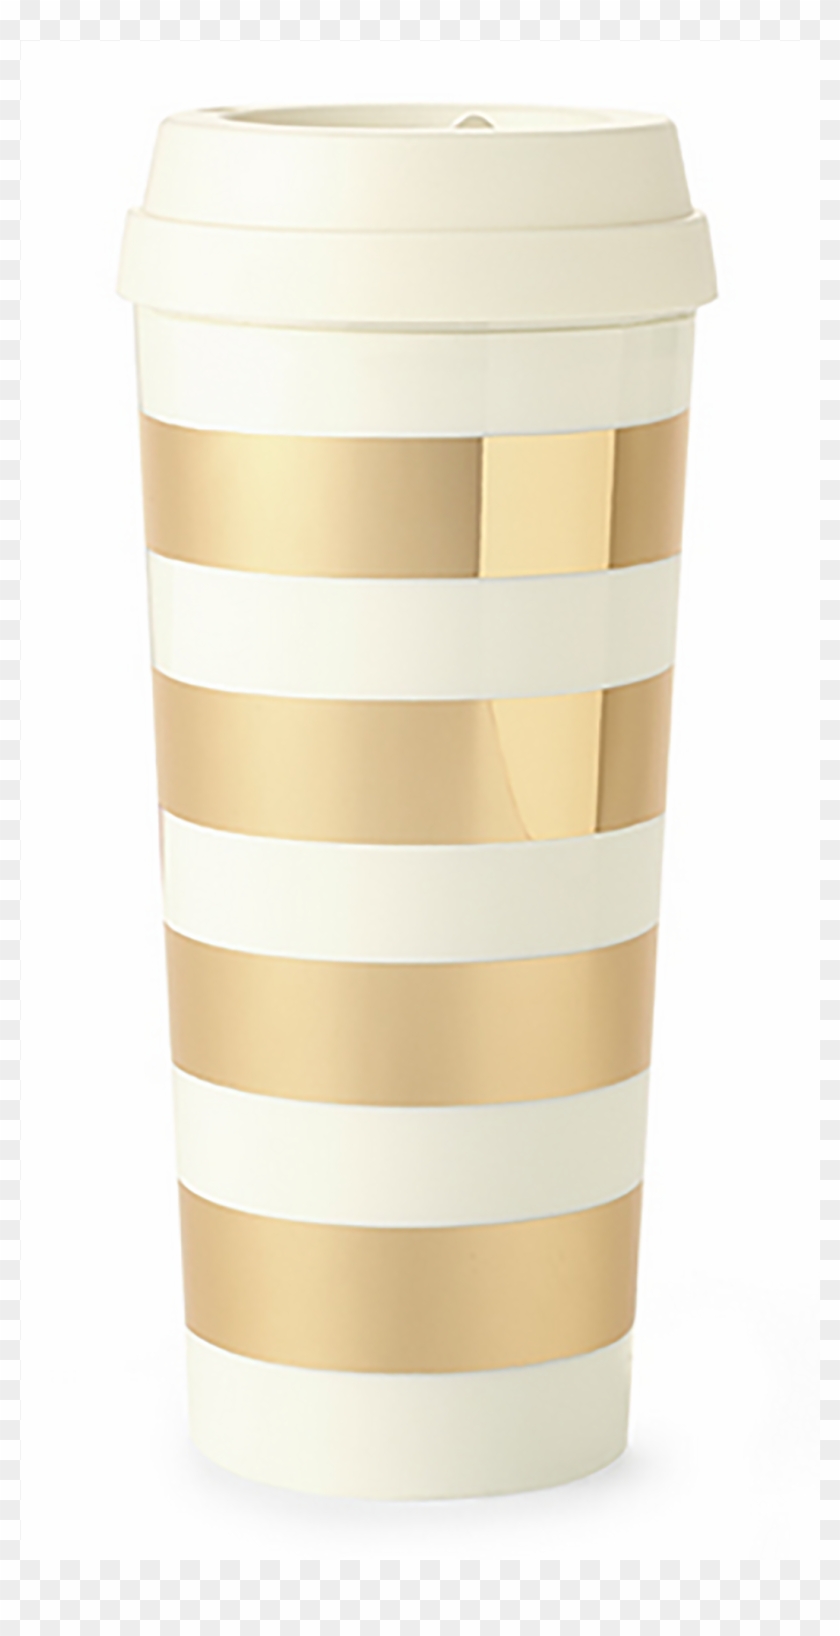 The Gold Stripe Graphics On The Kate Spade Gold Stripe - Kate Spade Thermal Mug Clipart #4269498